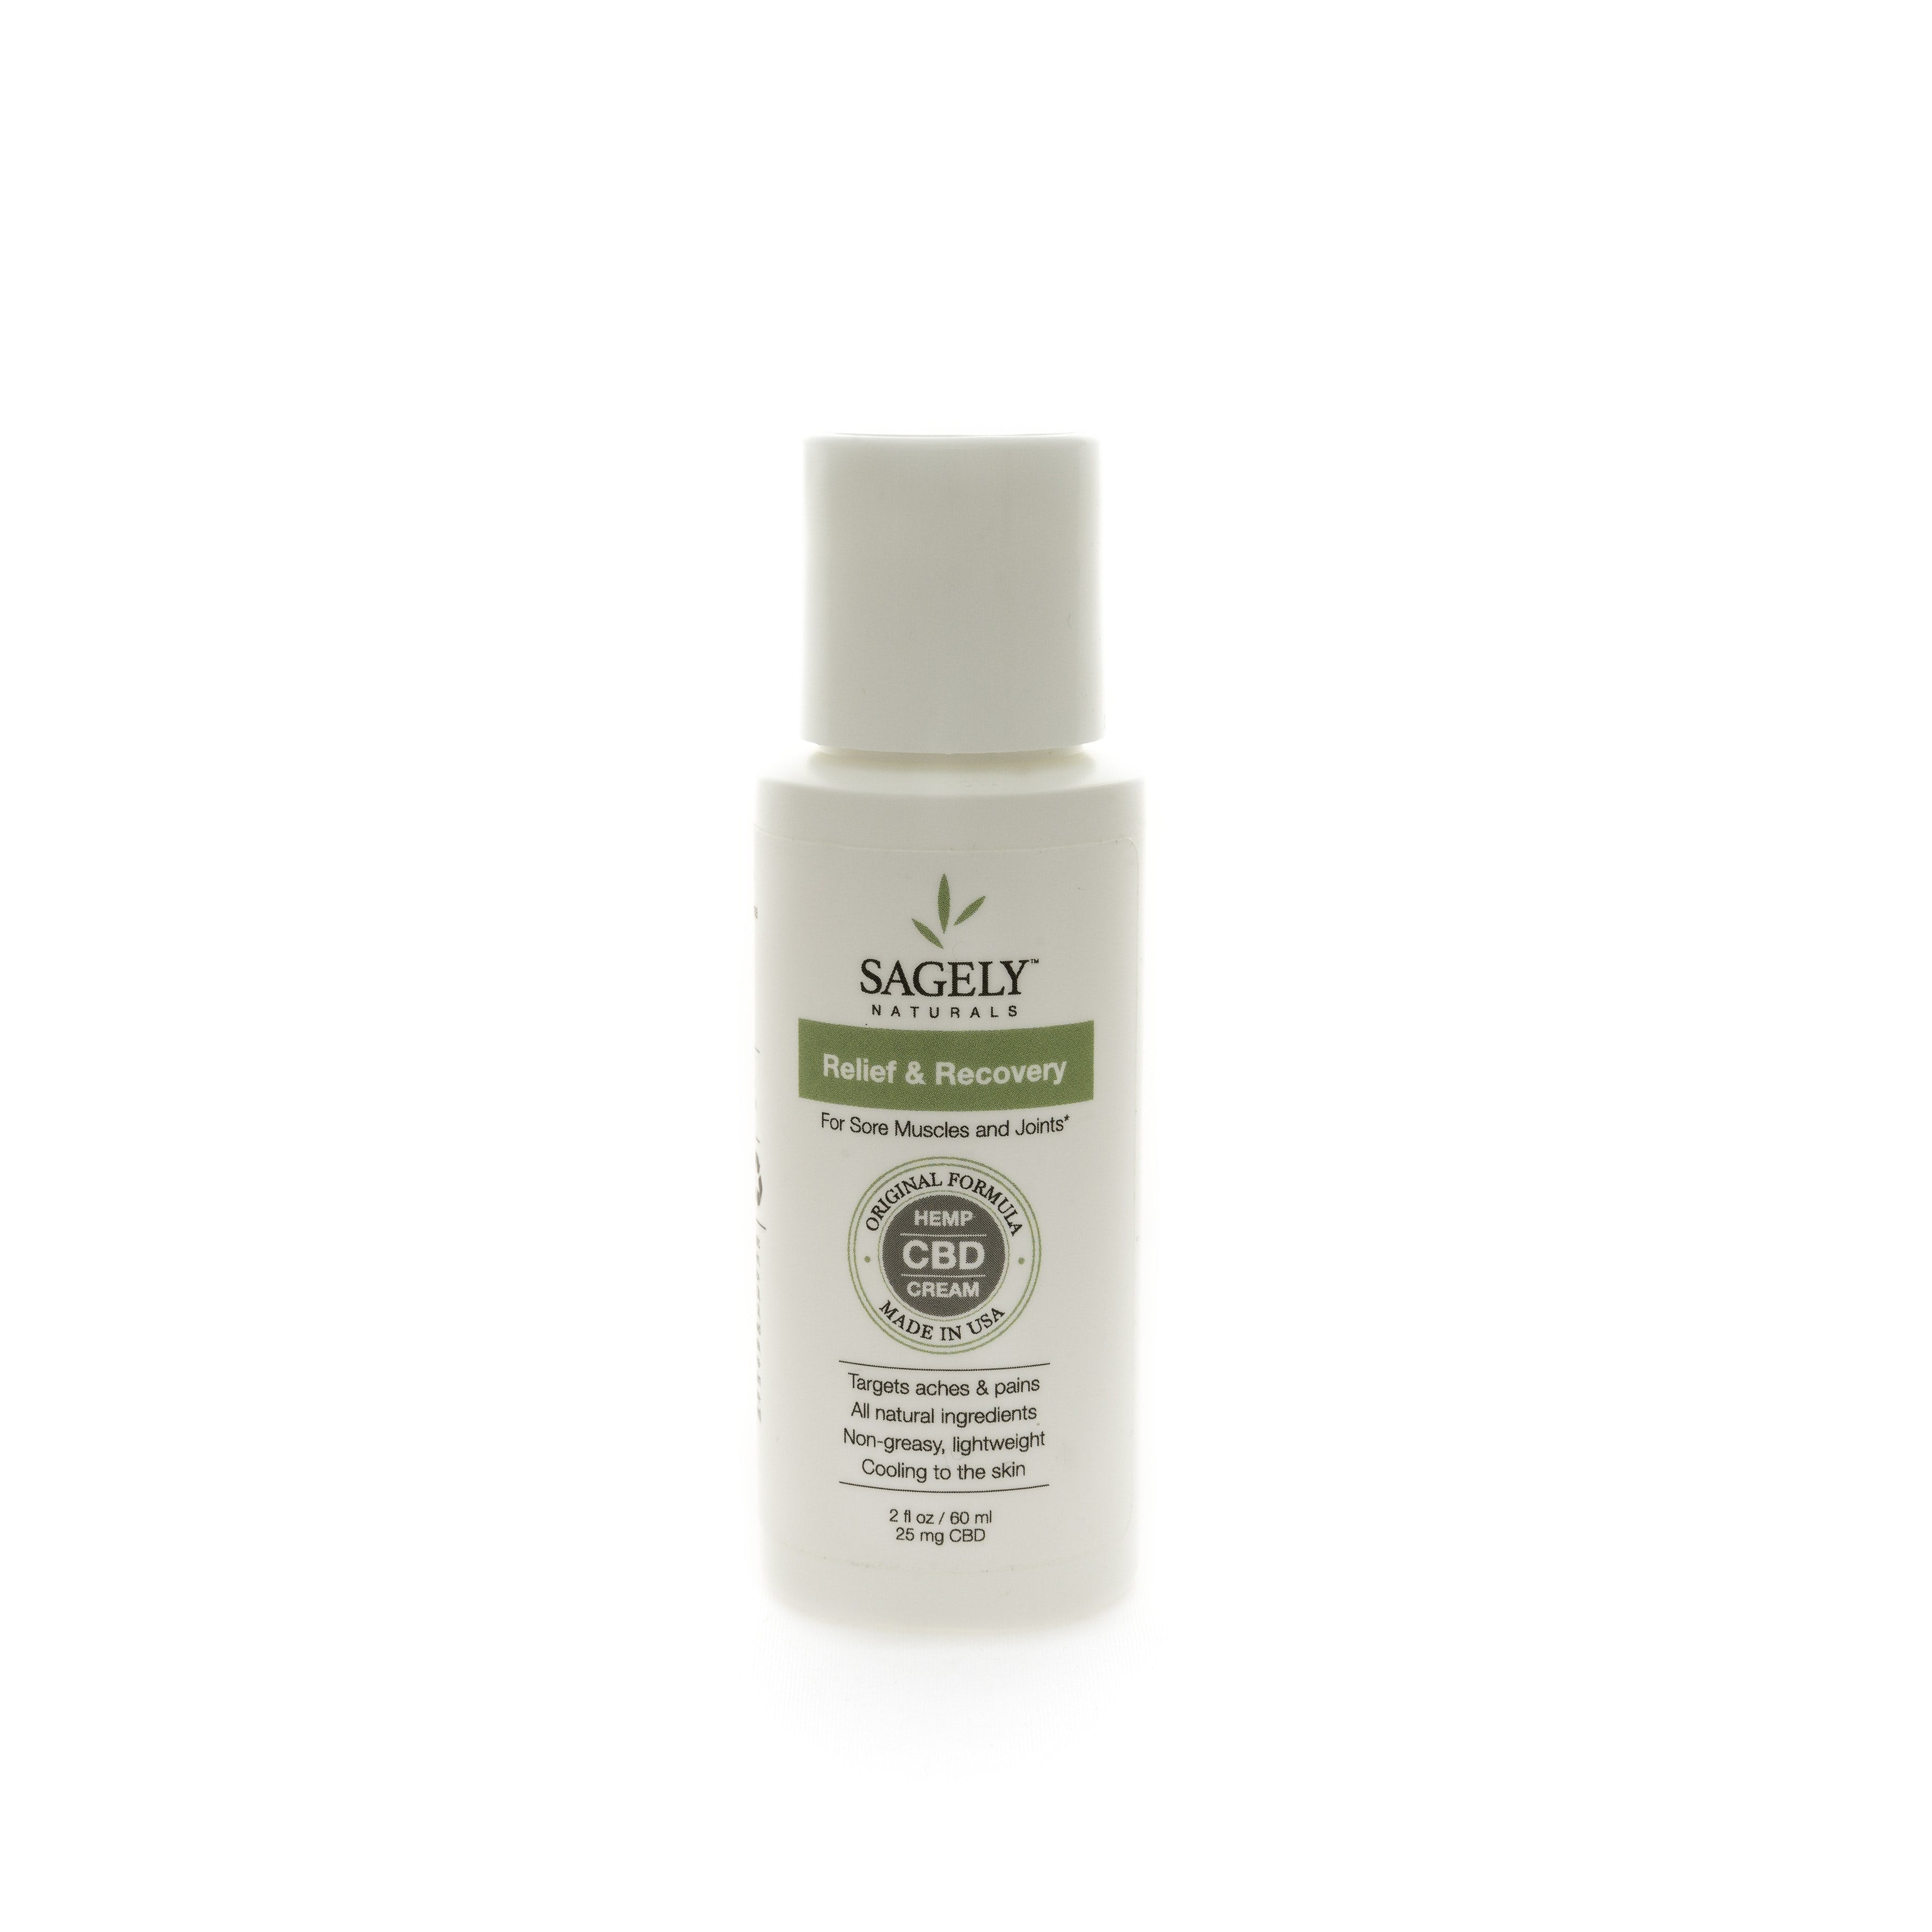 Sagely - Relief and Recovery Spray 2oz